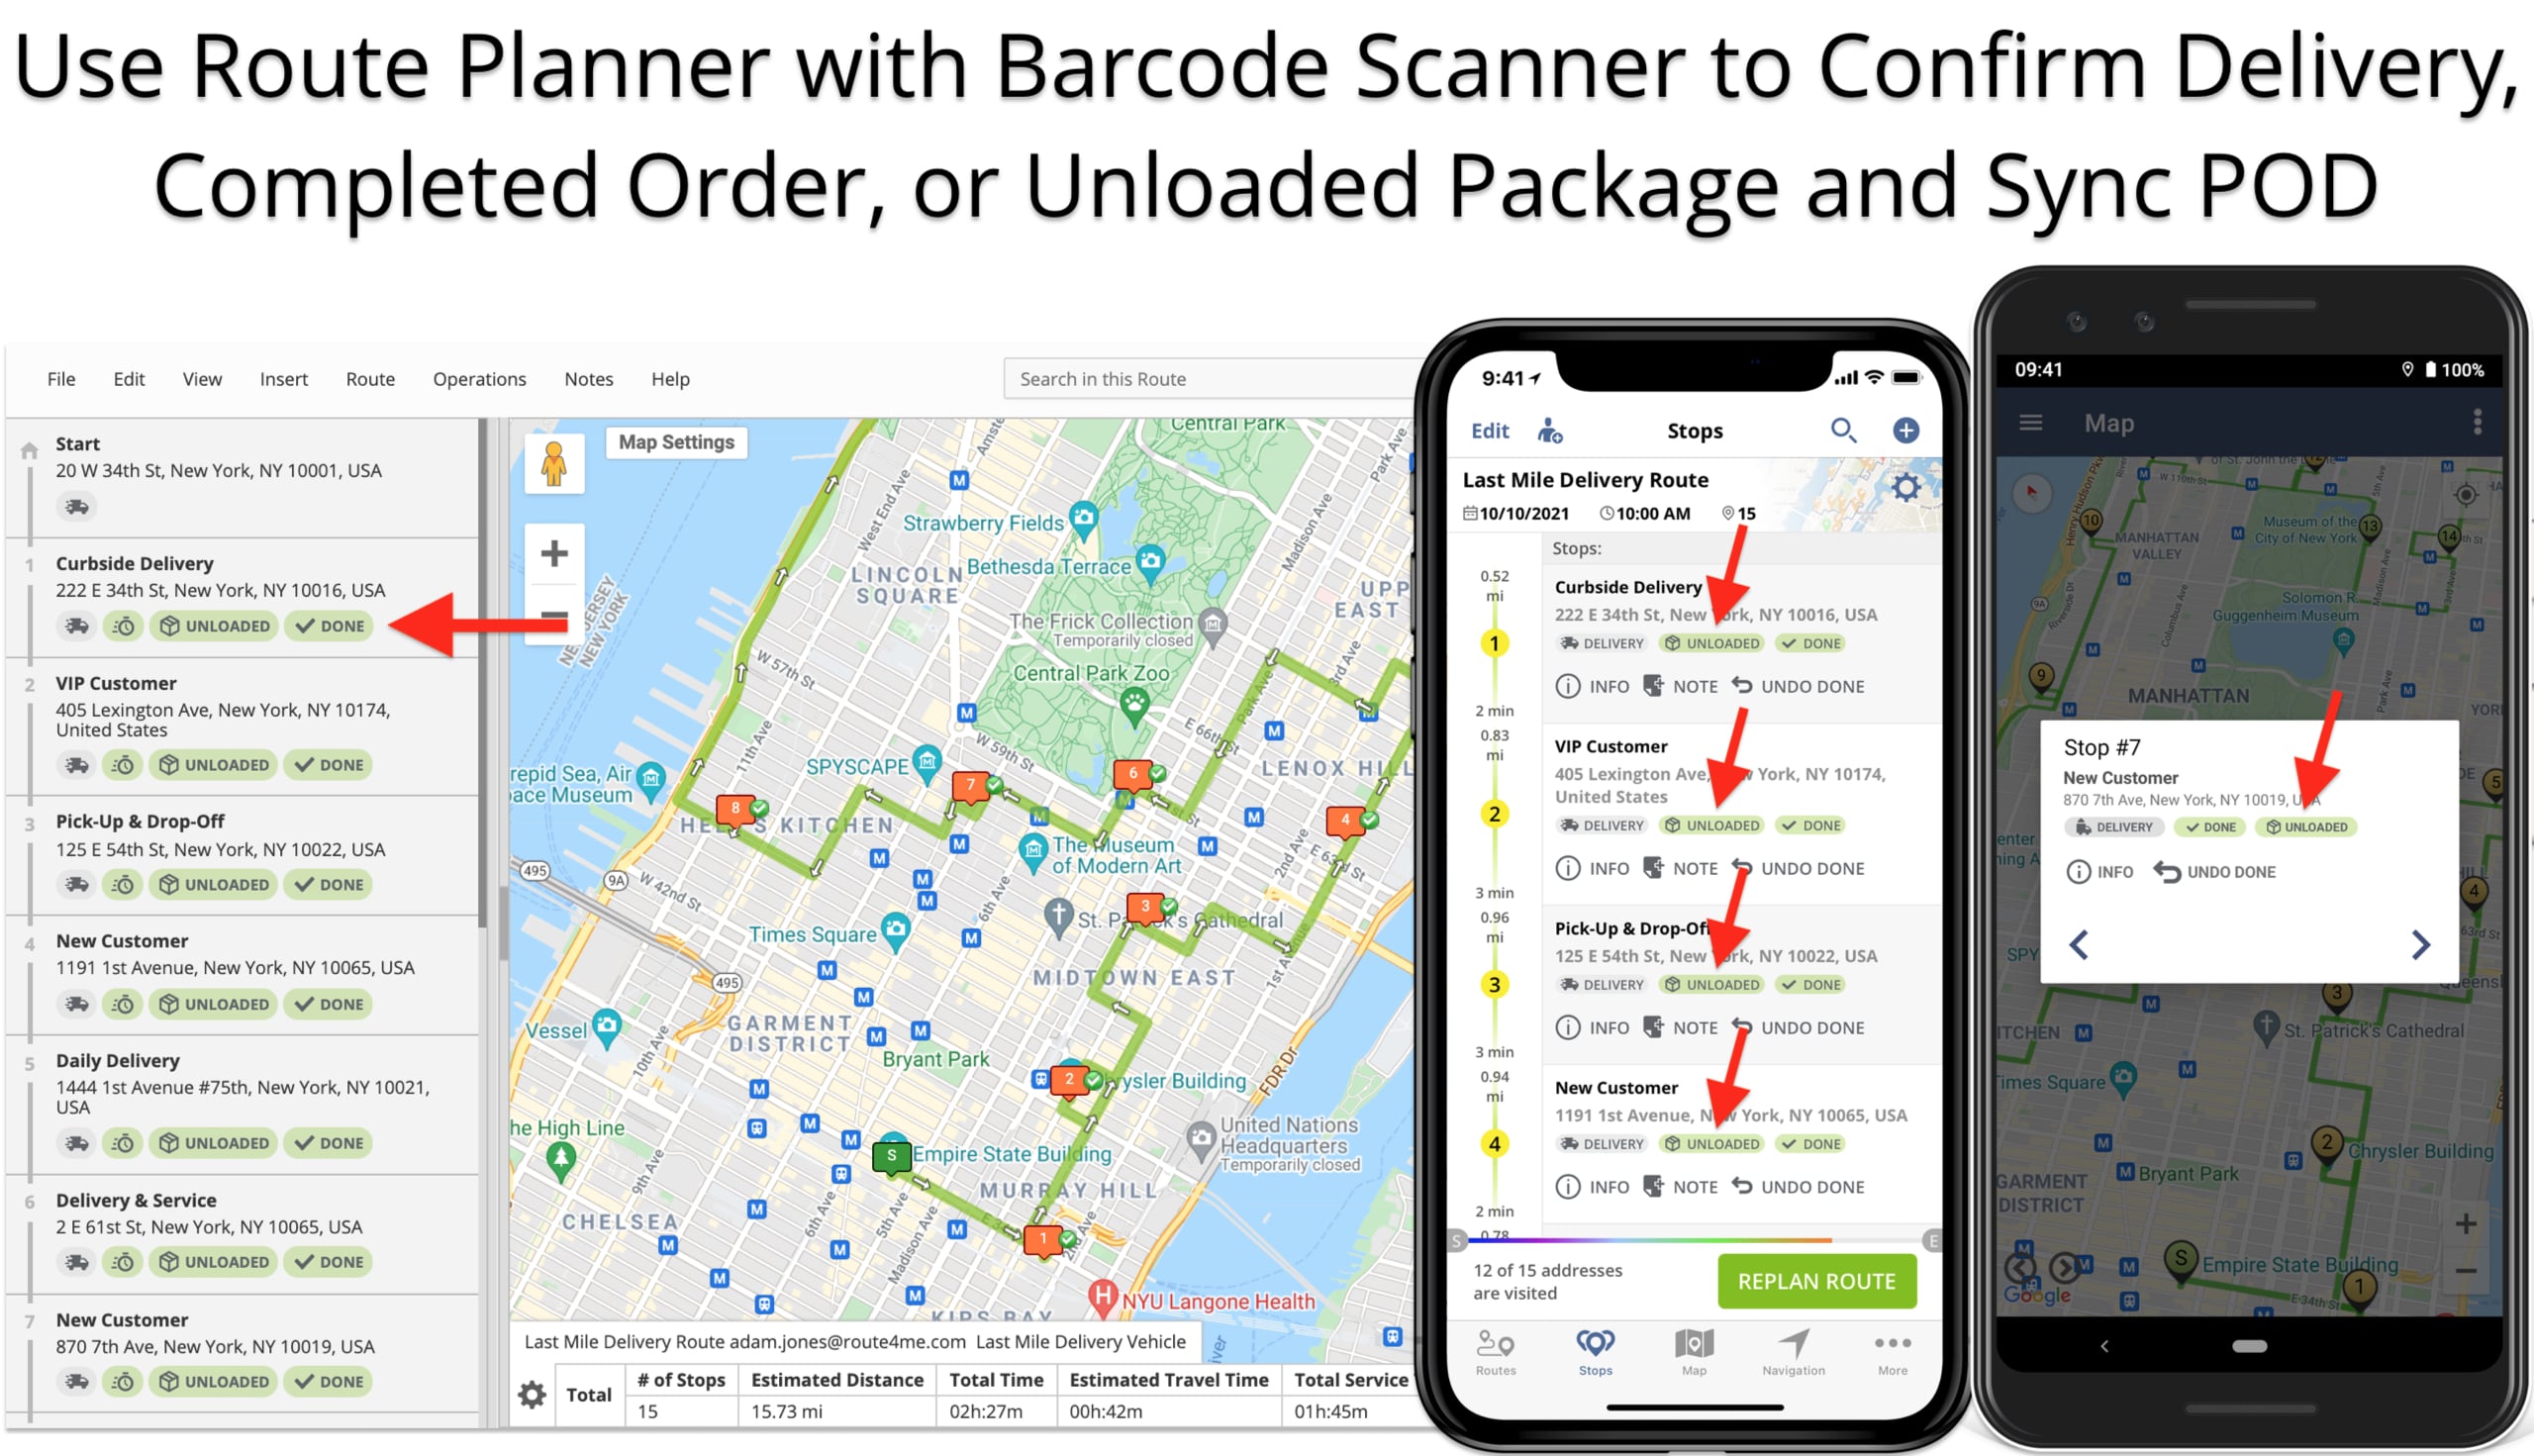 Route planner with barcode scanner app for delivery confirmation and unloaded package tracking.